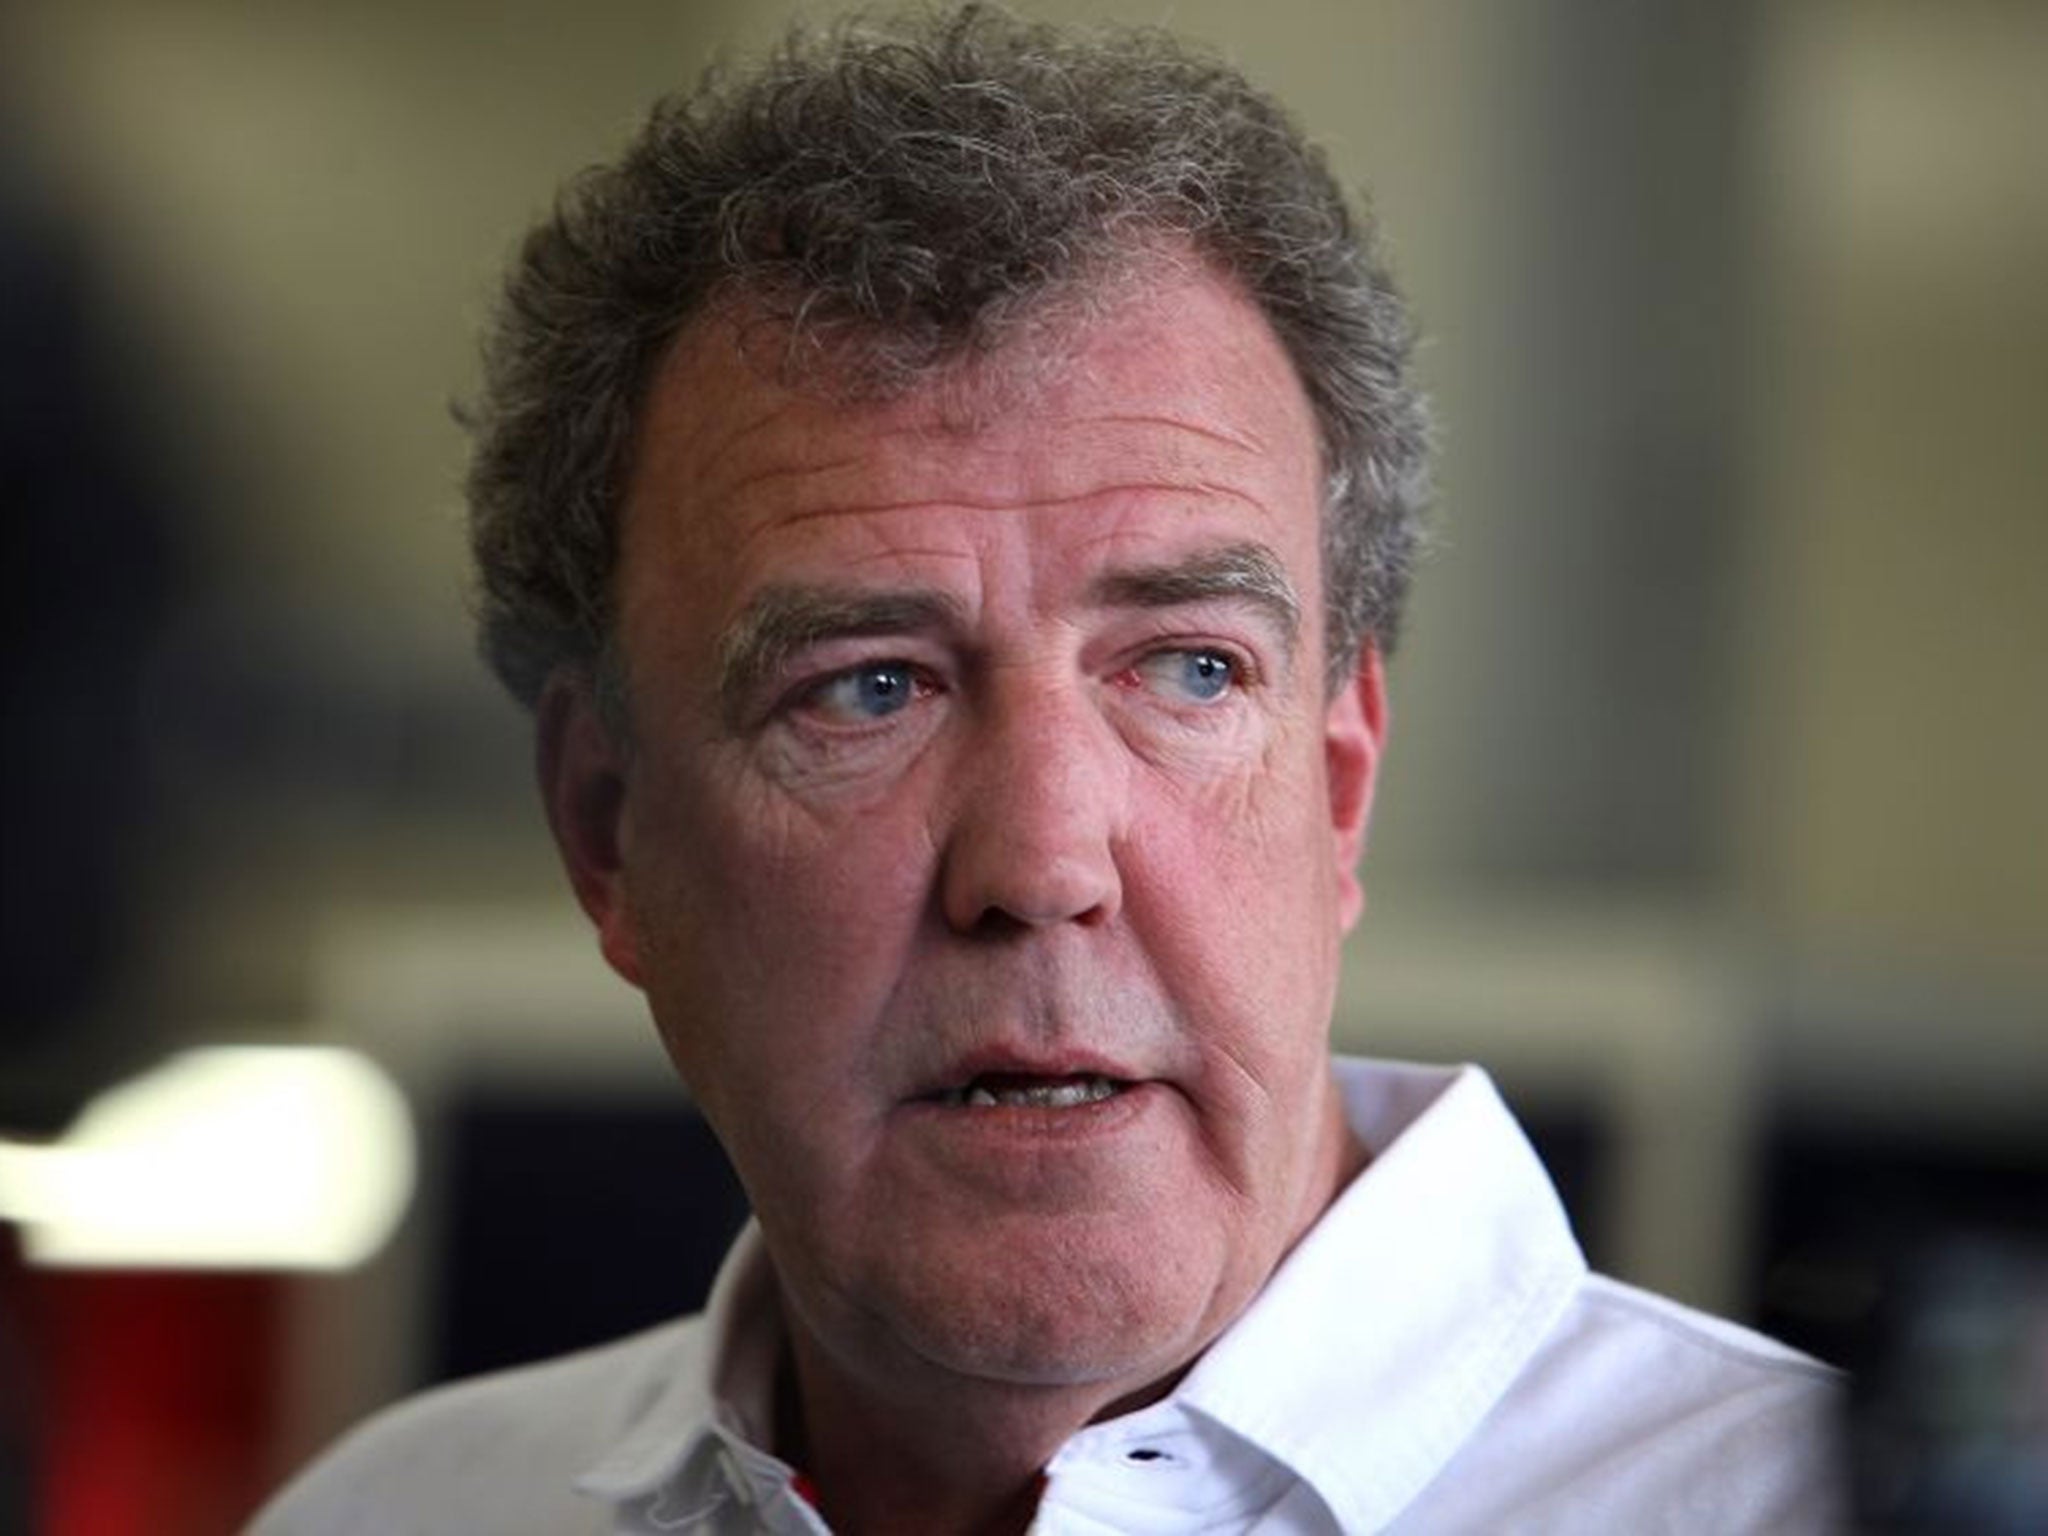 Jeremy Clarkson suspended BBC apologises to viewers for pulling Top